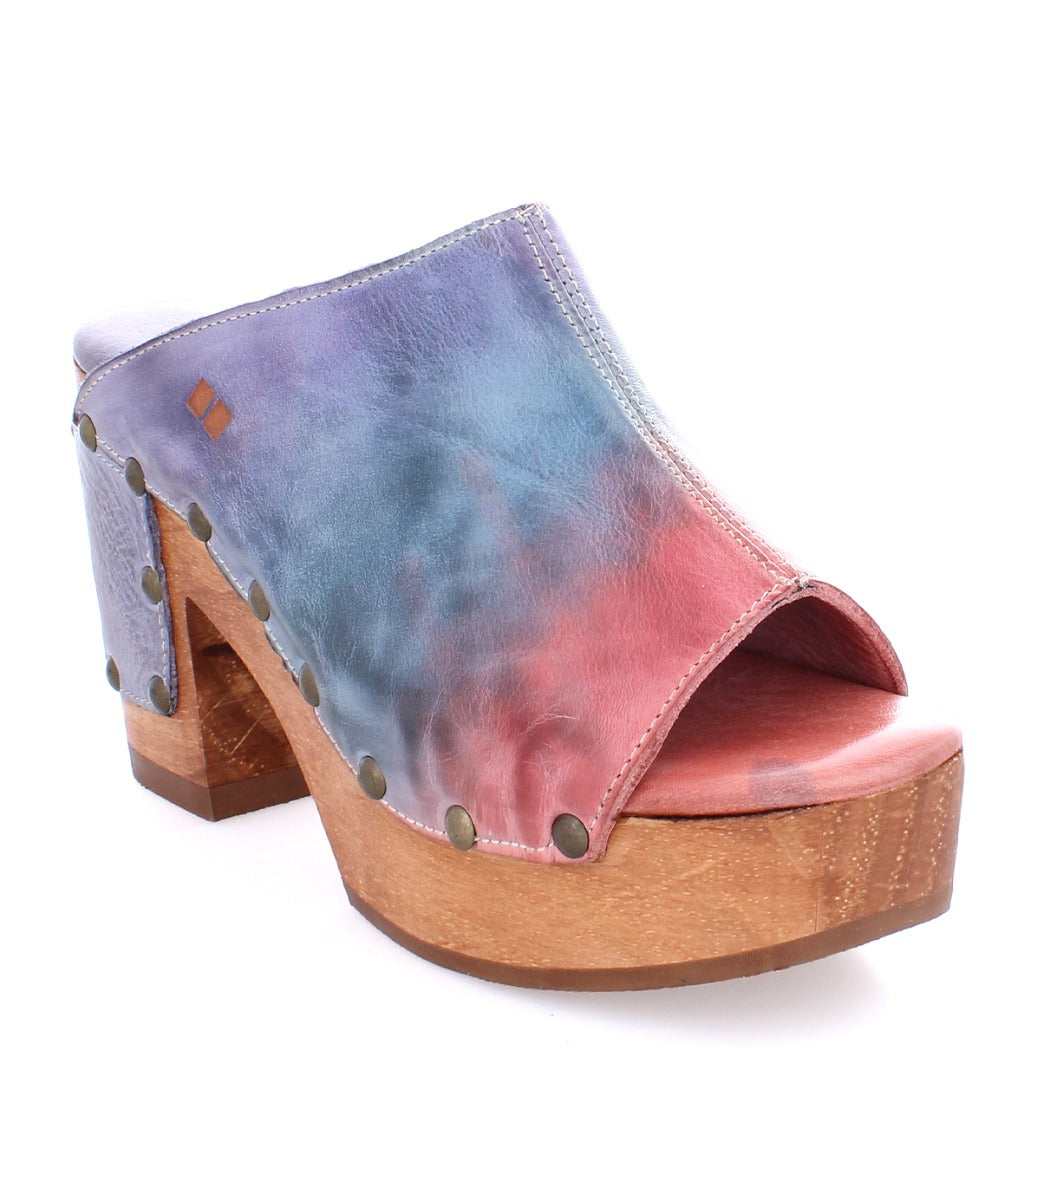 A women's Deva clog with a colorful tie dye pattern from Bed Stu.